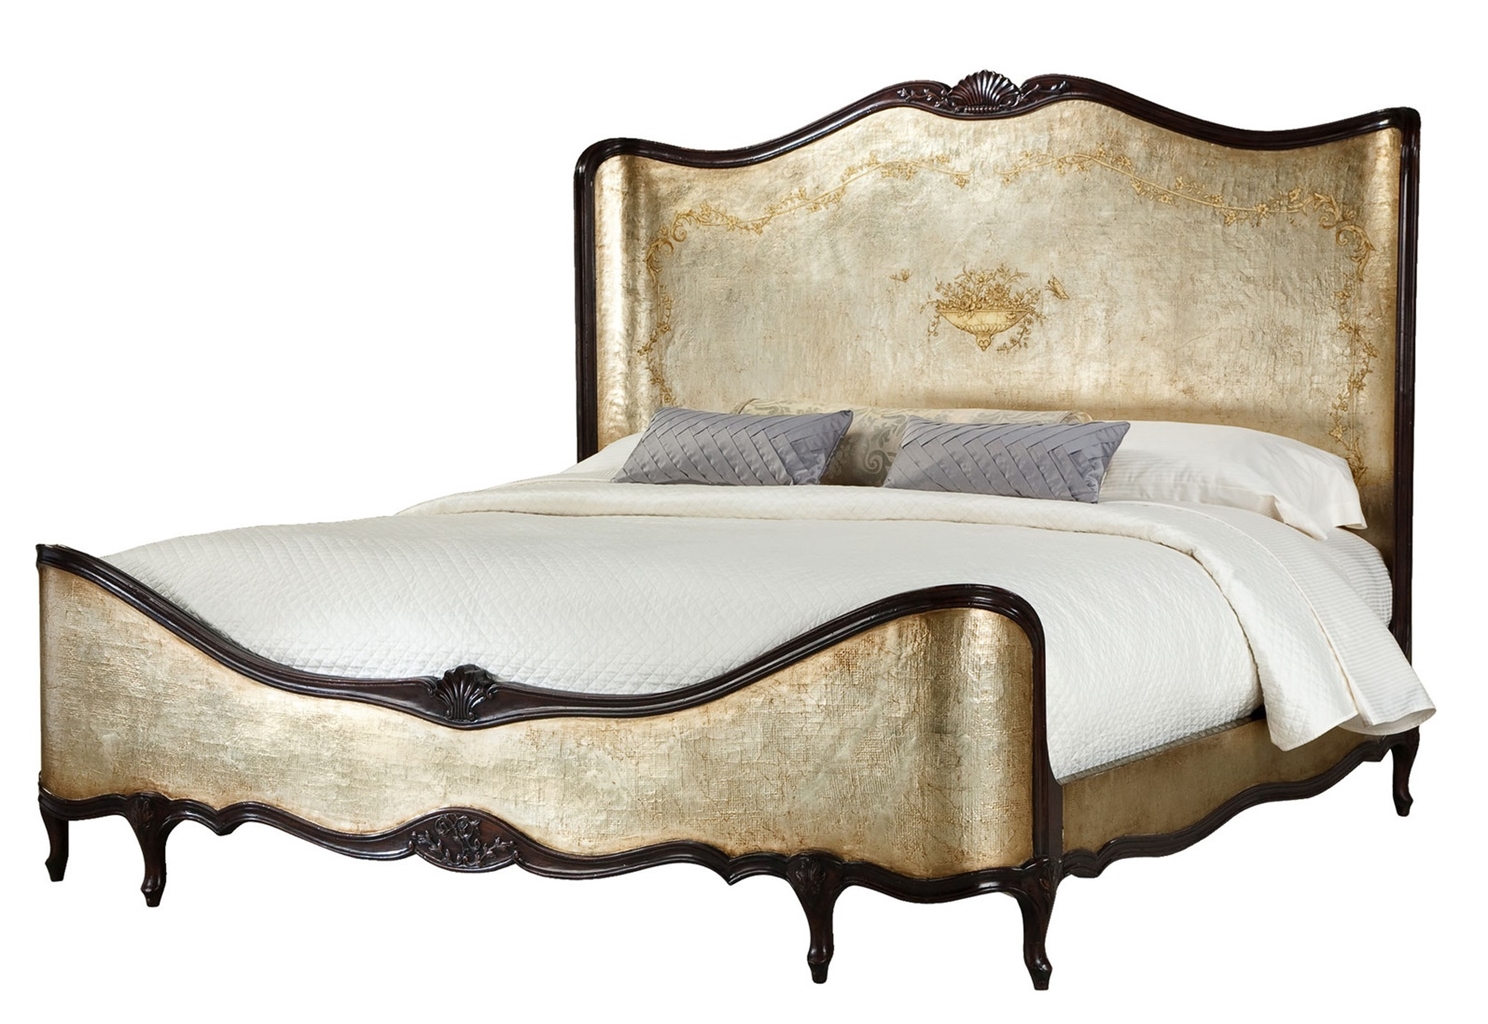 https://bernadettelivingston.com/8262/french-style-bed-gold-decorated-bed.jpg